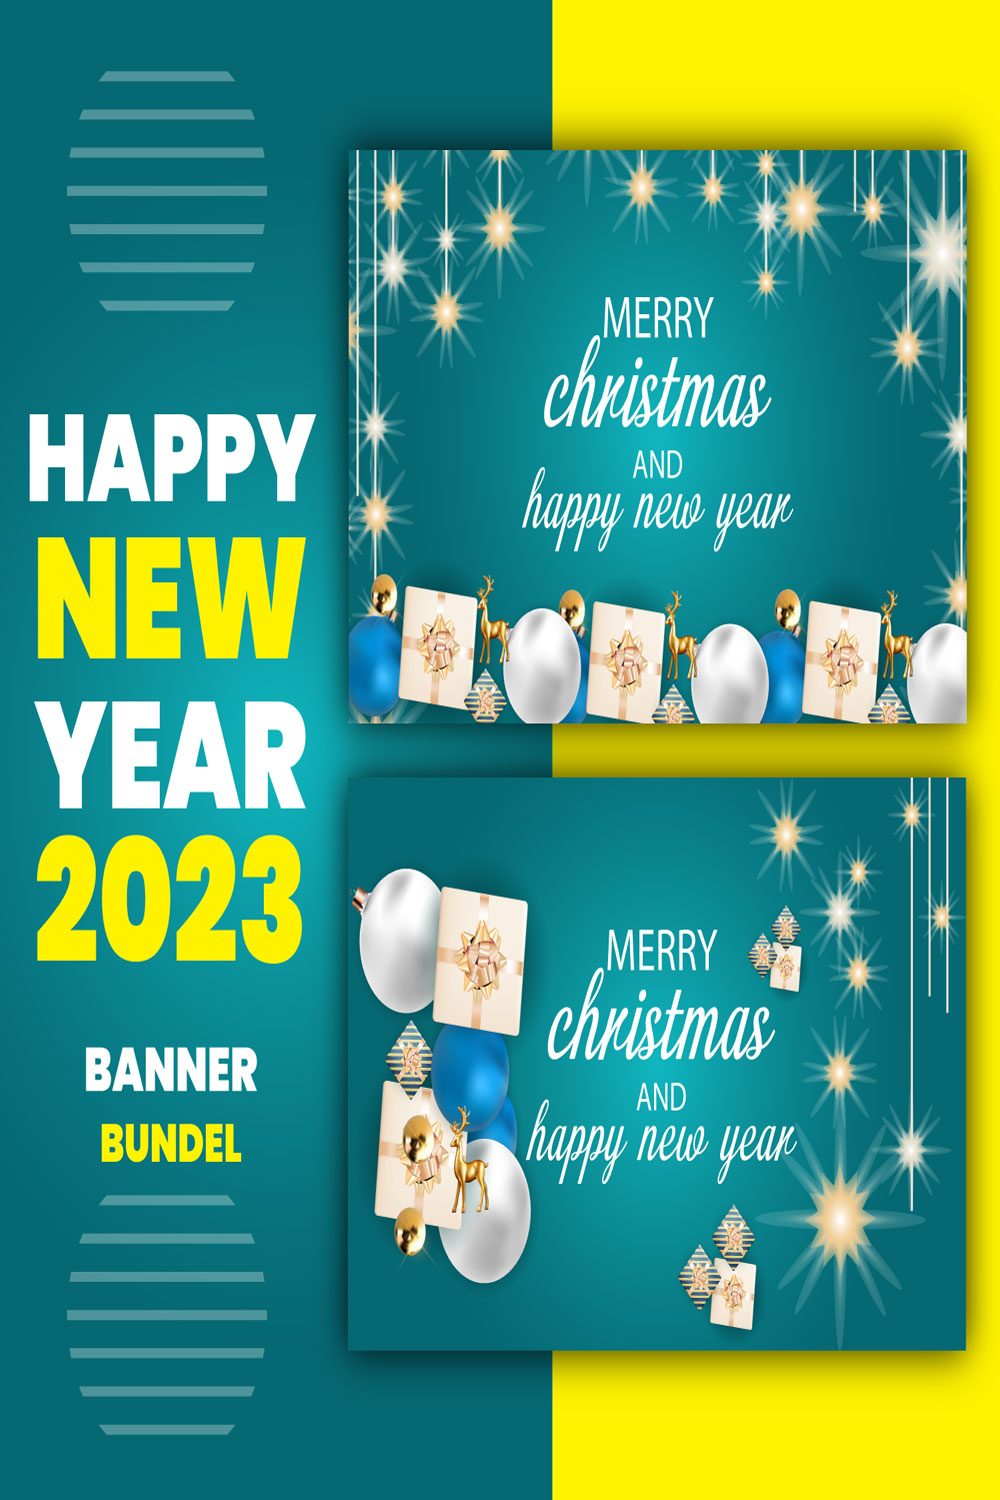 Merry Christmas and Happy New Year 2023 Banner pinterest image.